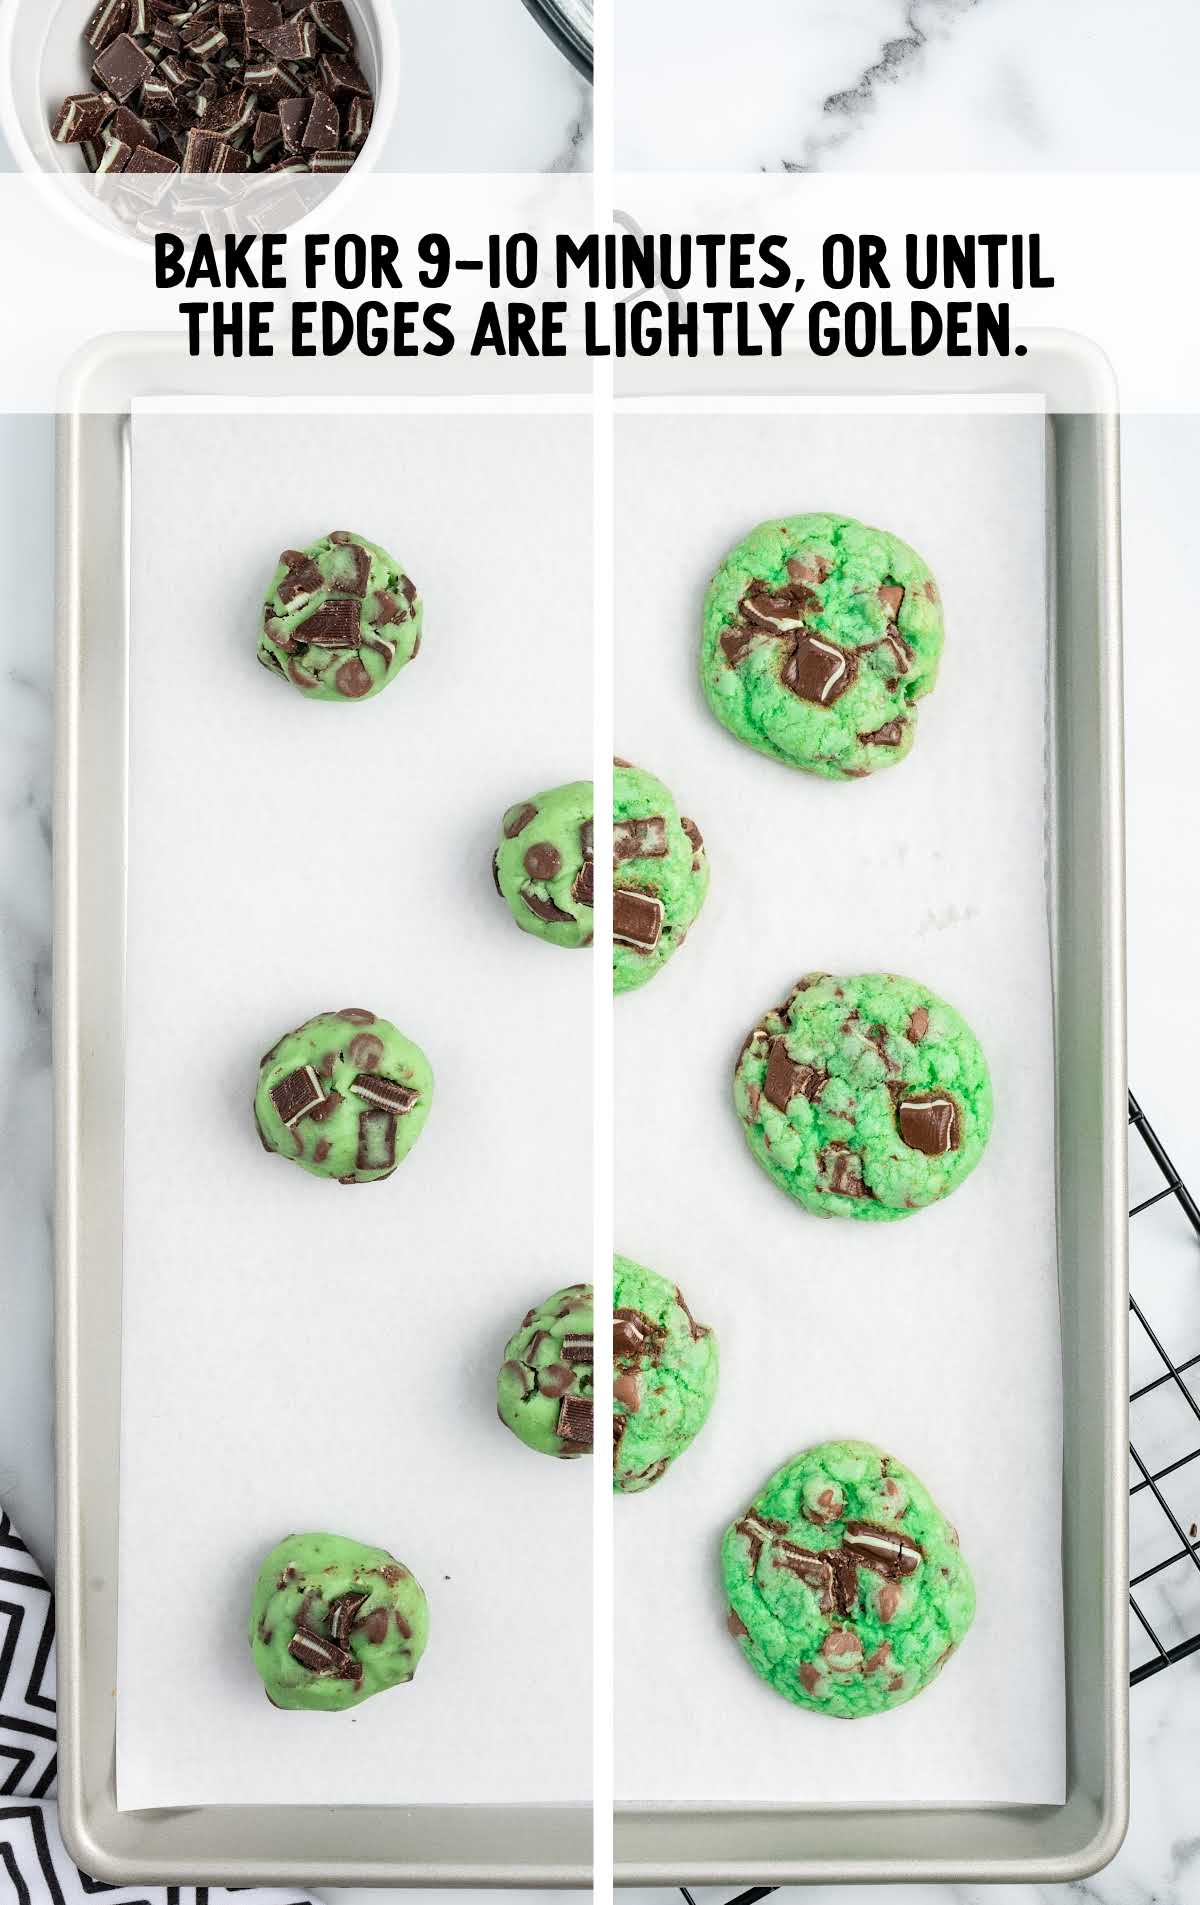 bake the Mint Chocolate Chip Cookies